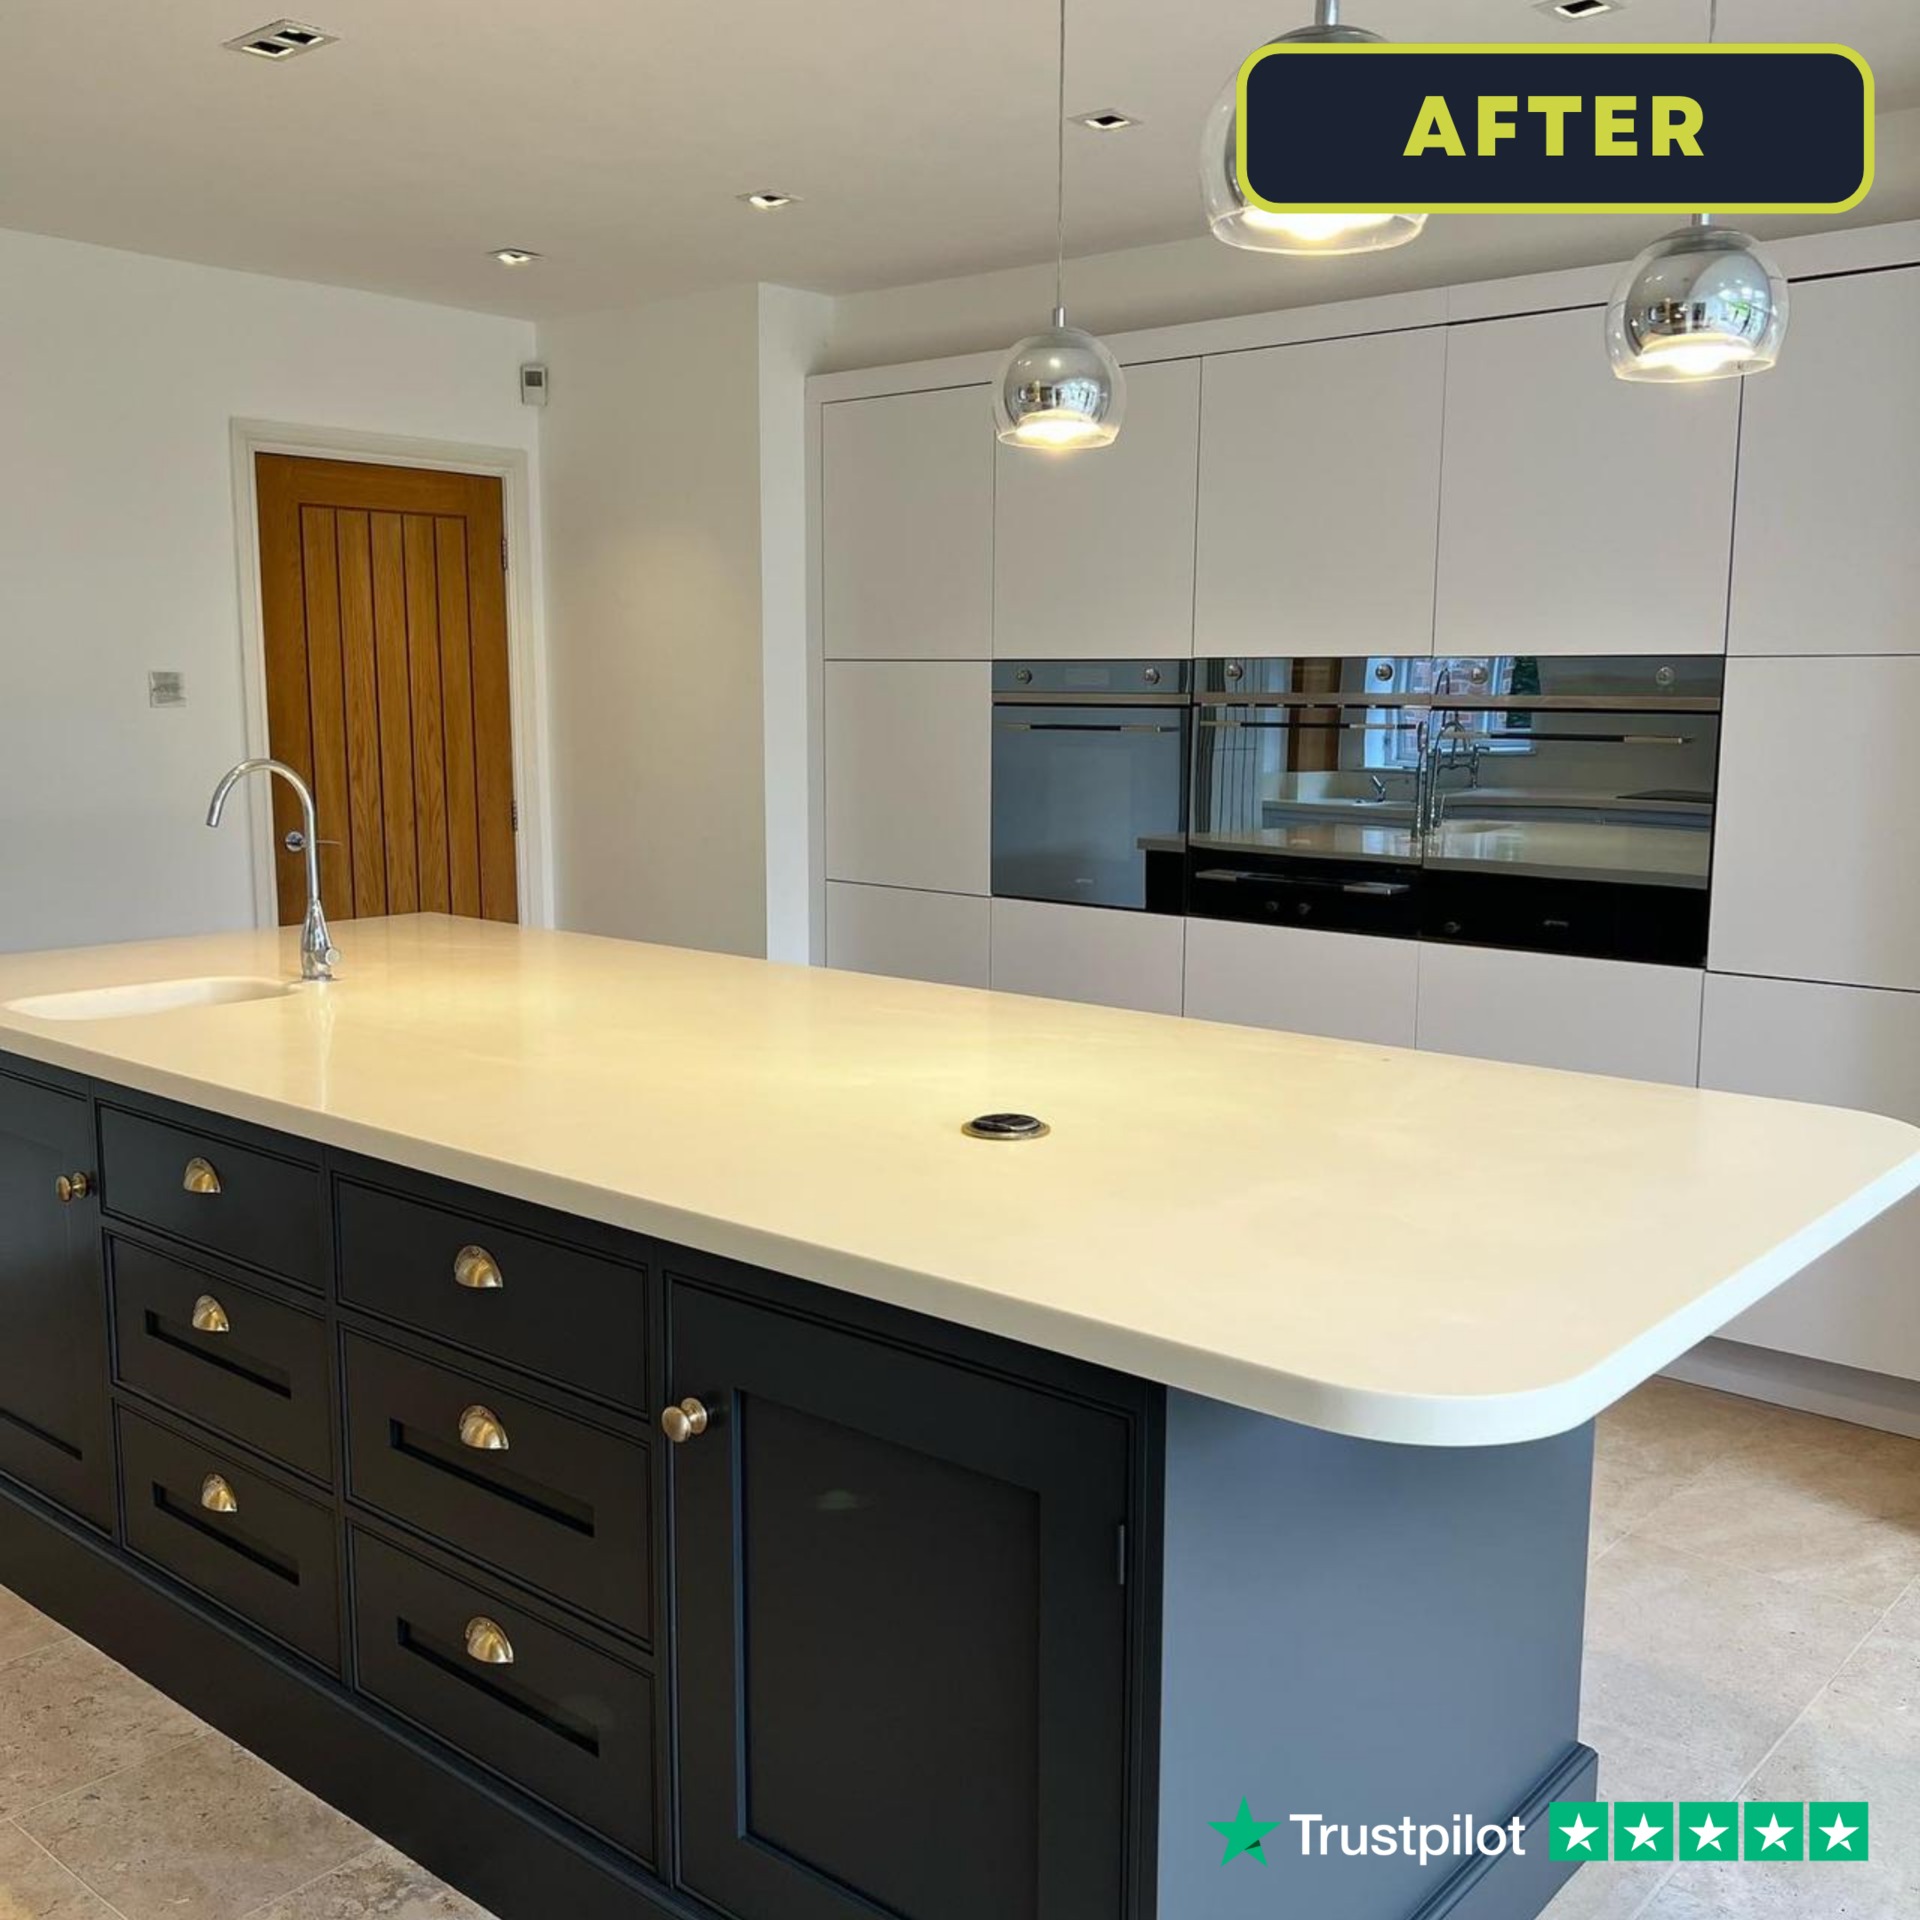 Before and after Kitchen Respraying in Cheshire